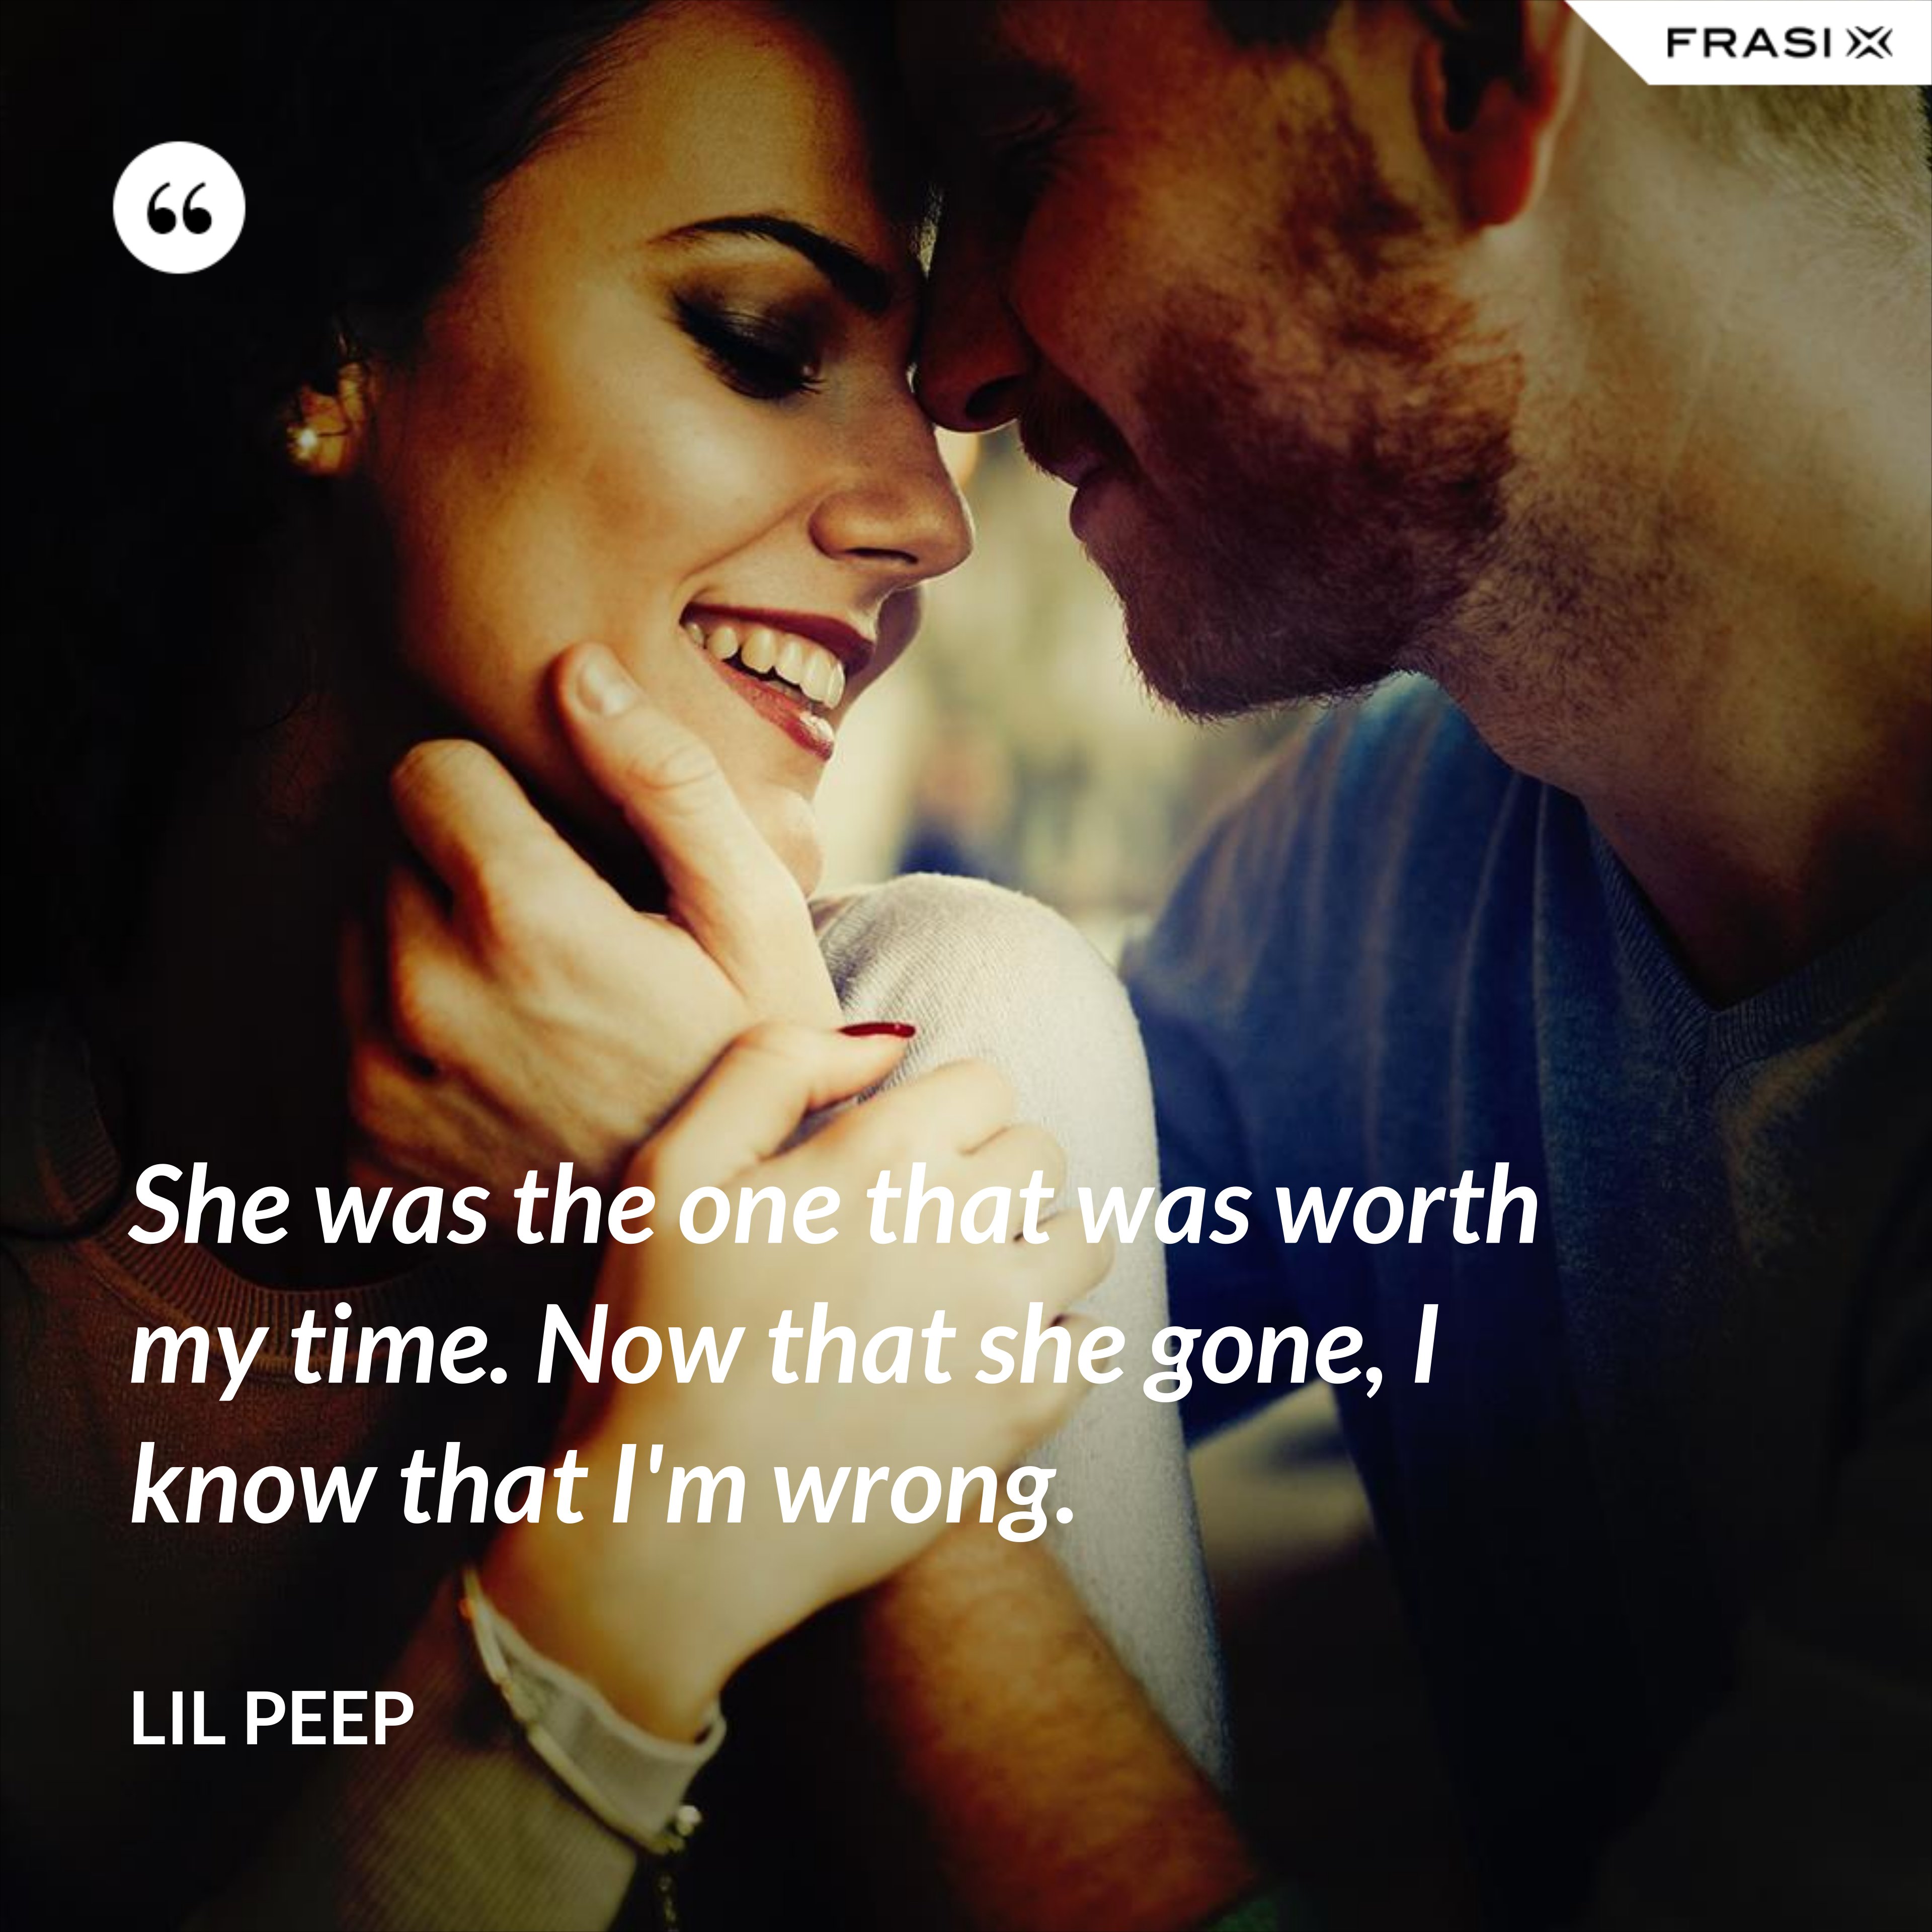 She was the one that was worth my time. Now that she gone, I know that I'm wrong. - Lil Peep